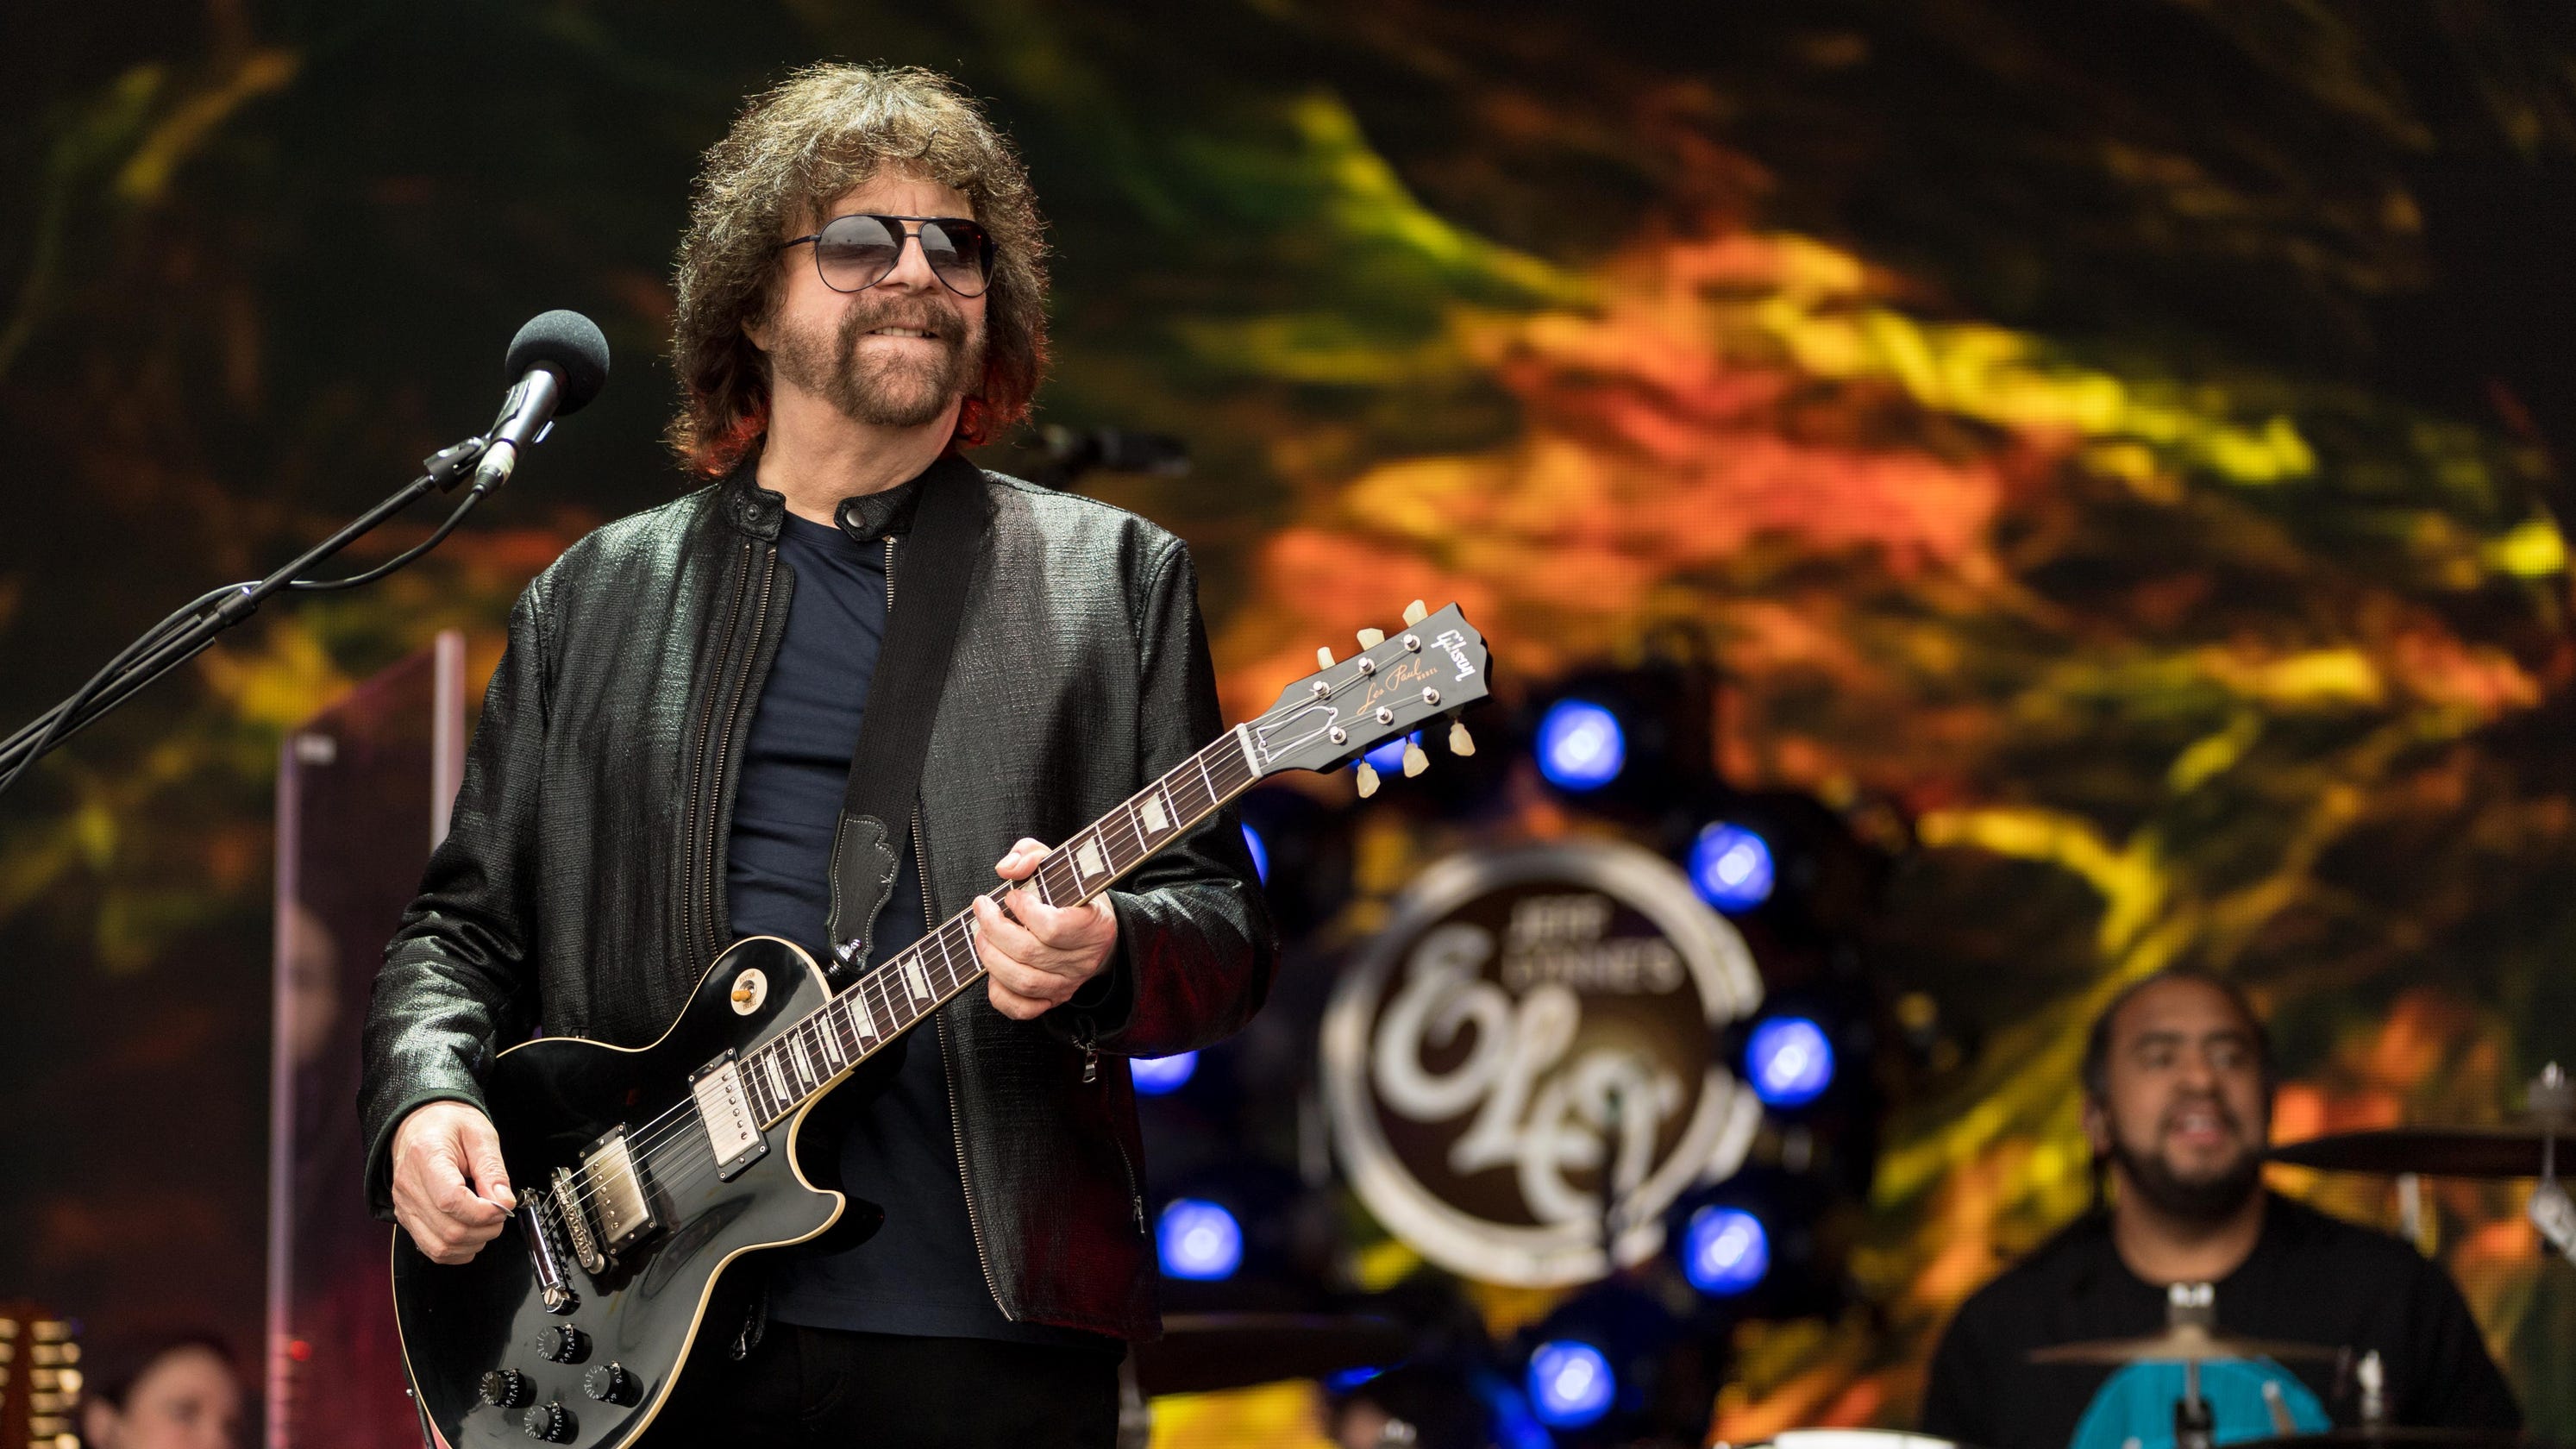 Batch of tickets for Thursday's ELO concert released